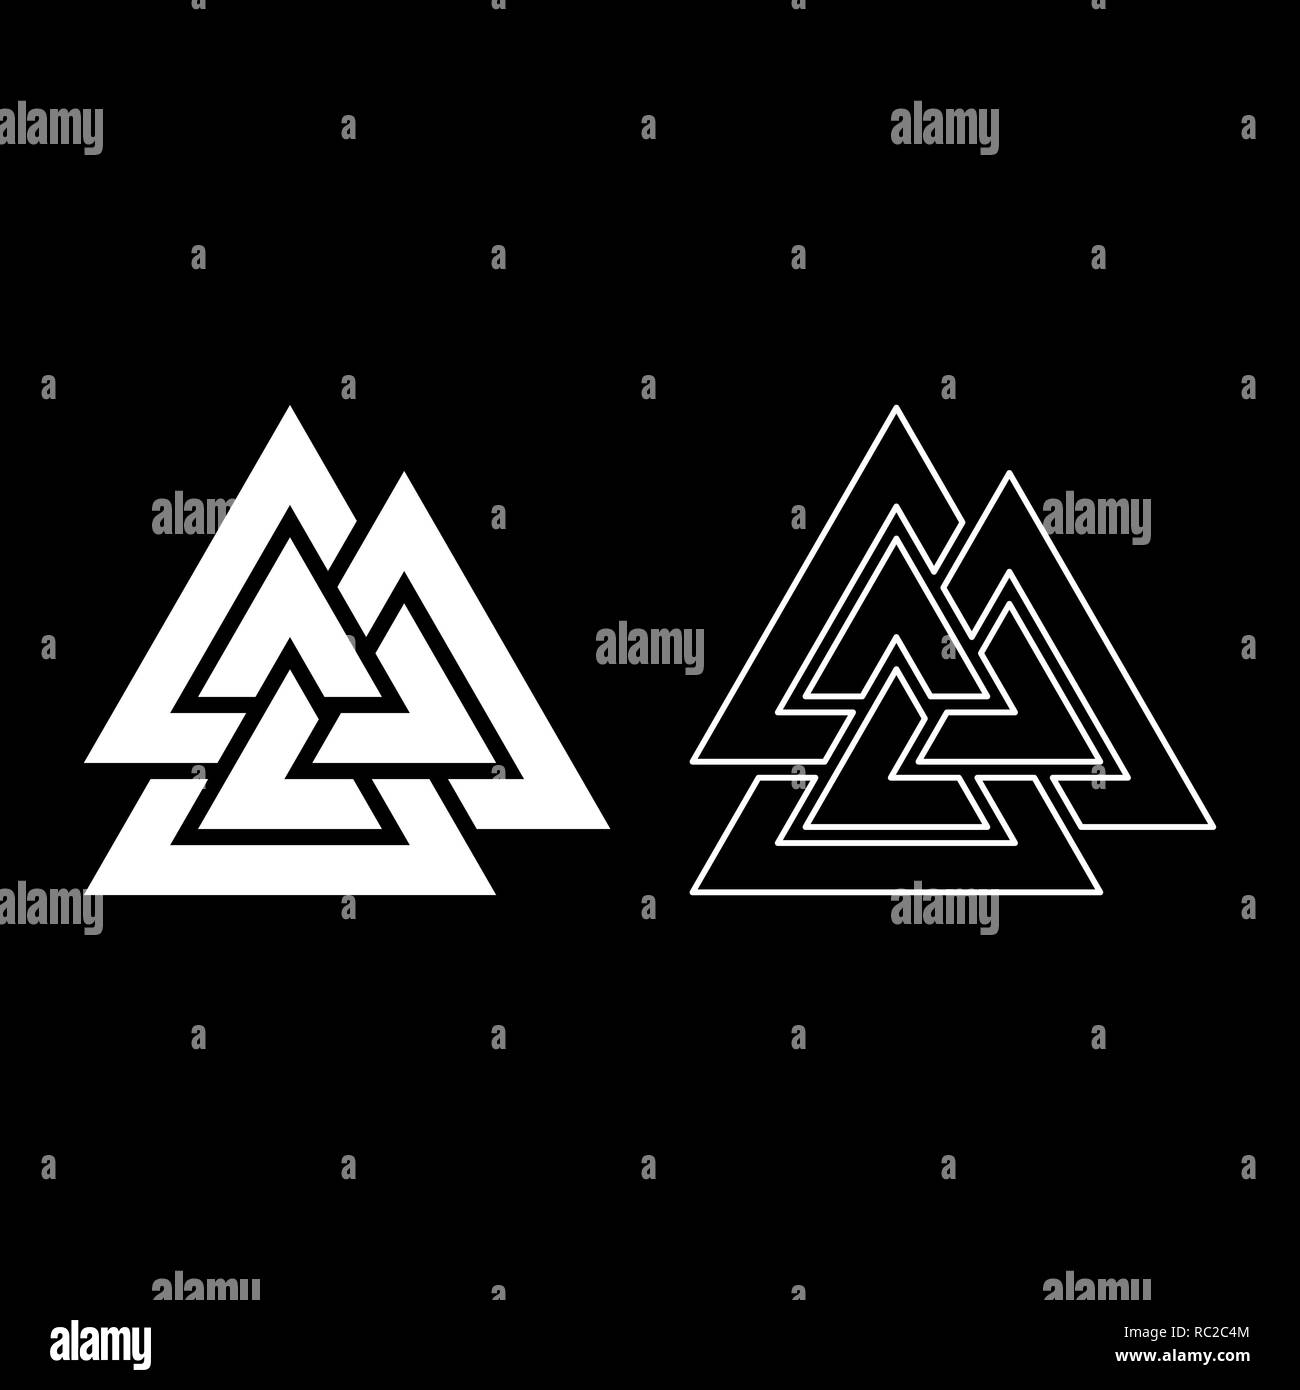 Valknut sign symblol icon set white color I flat outline style simple image Stock Vector